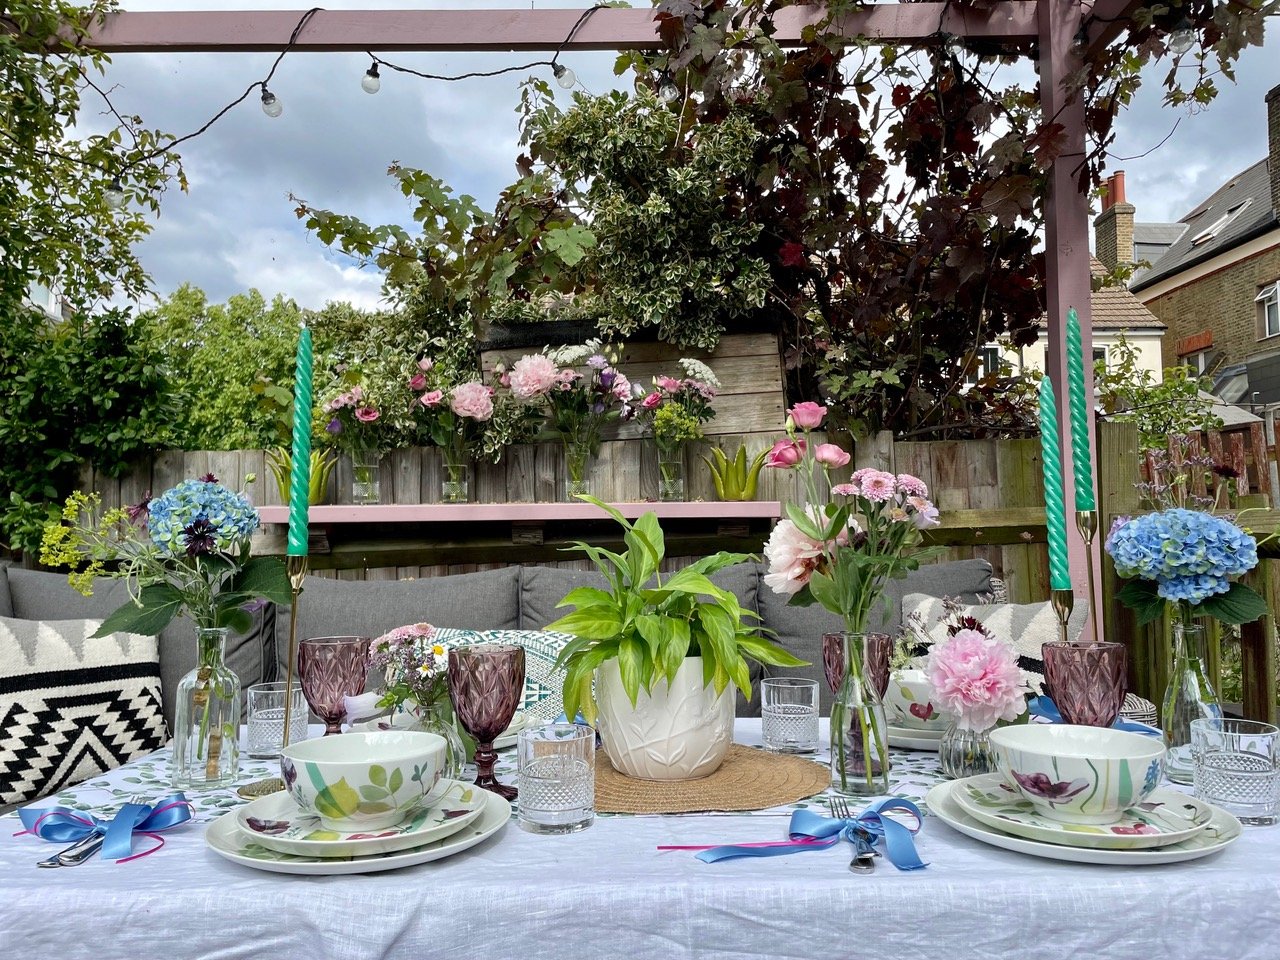 How to style an outdoor dining table